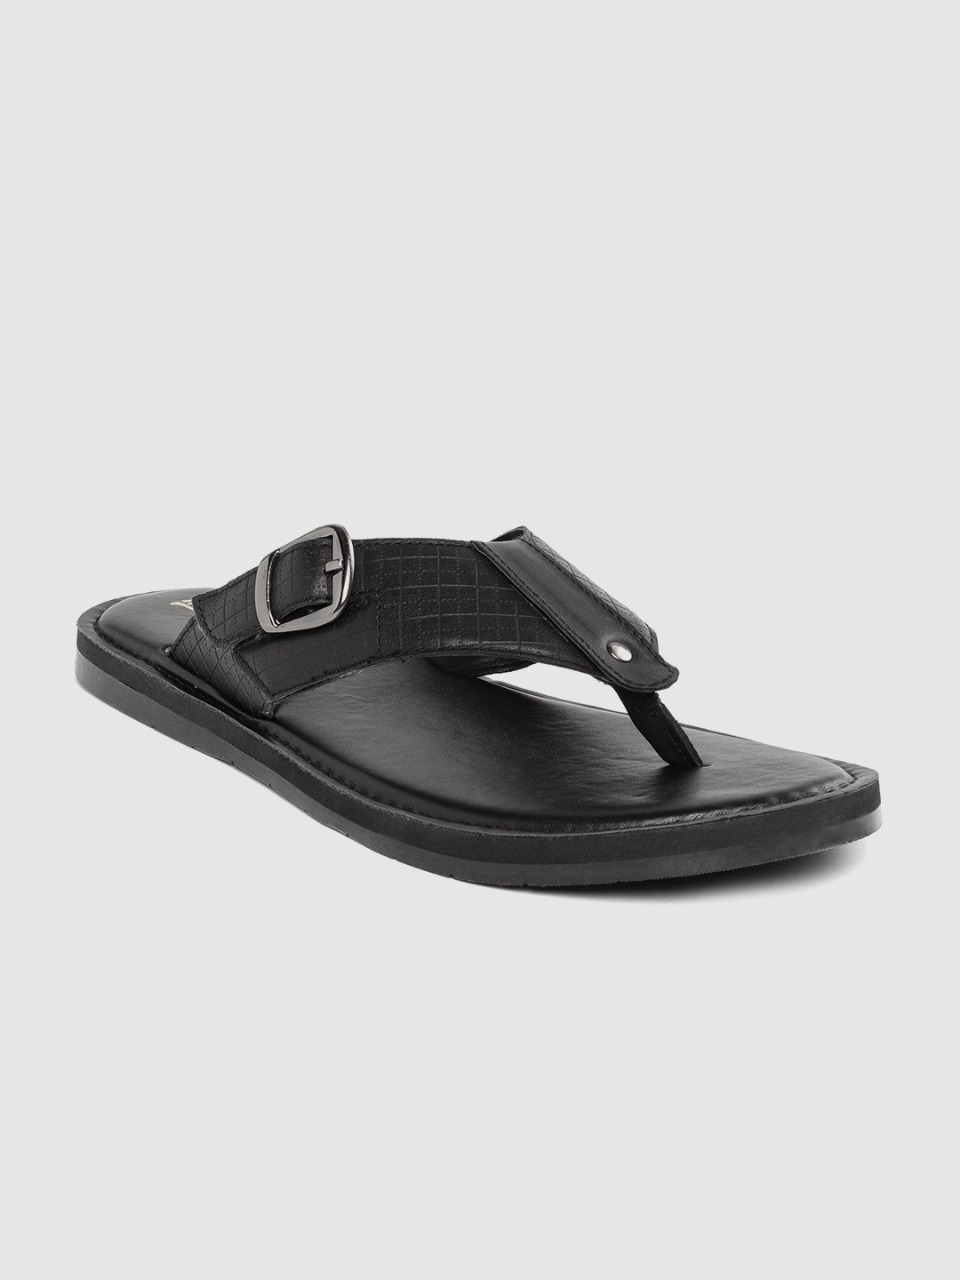 Buy Roadster Roadster Men Black Solid Thong Sandals with Thread Work Detail  at Redfynd